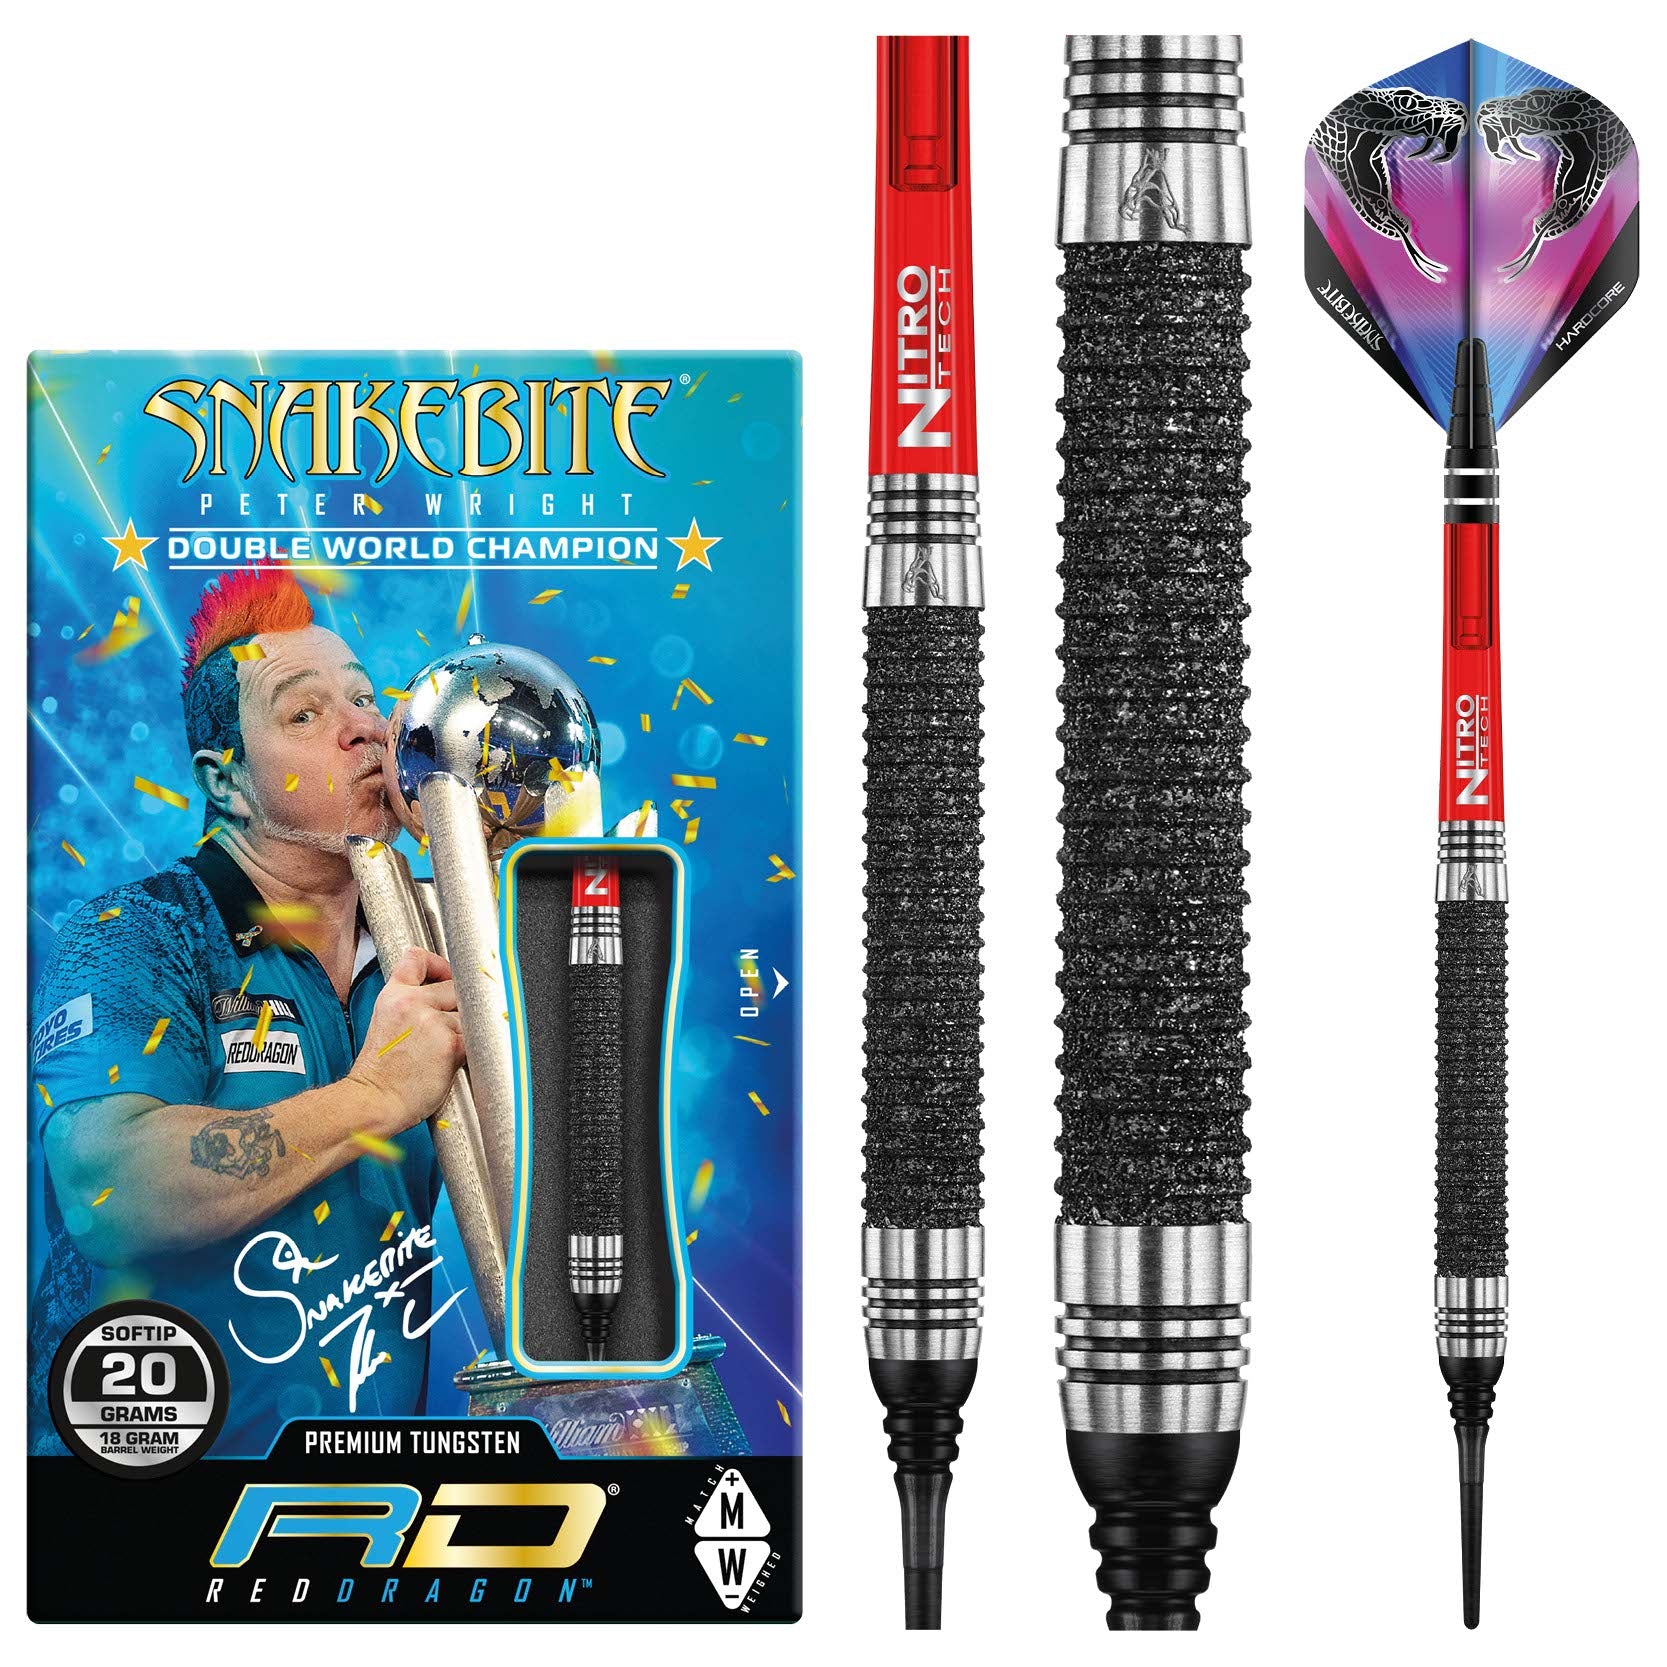 Peter Wright Melbourne Masters Edition Softip